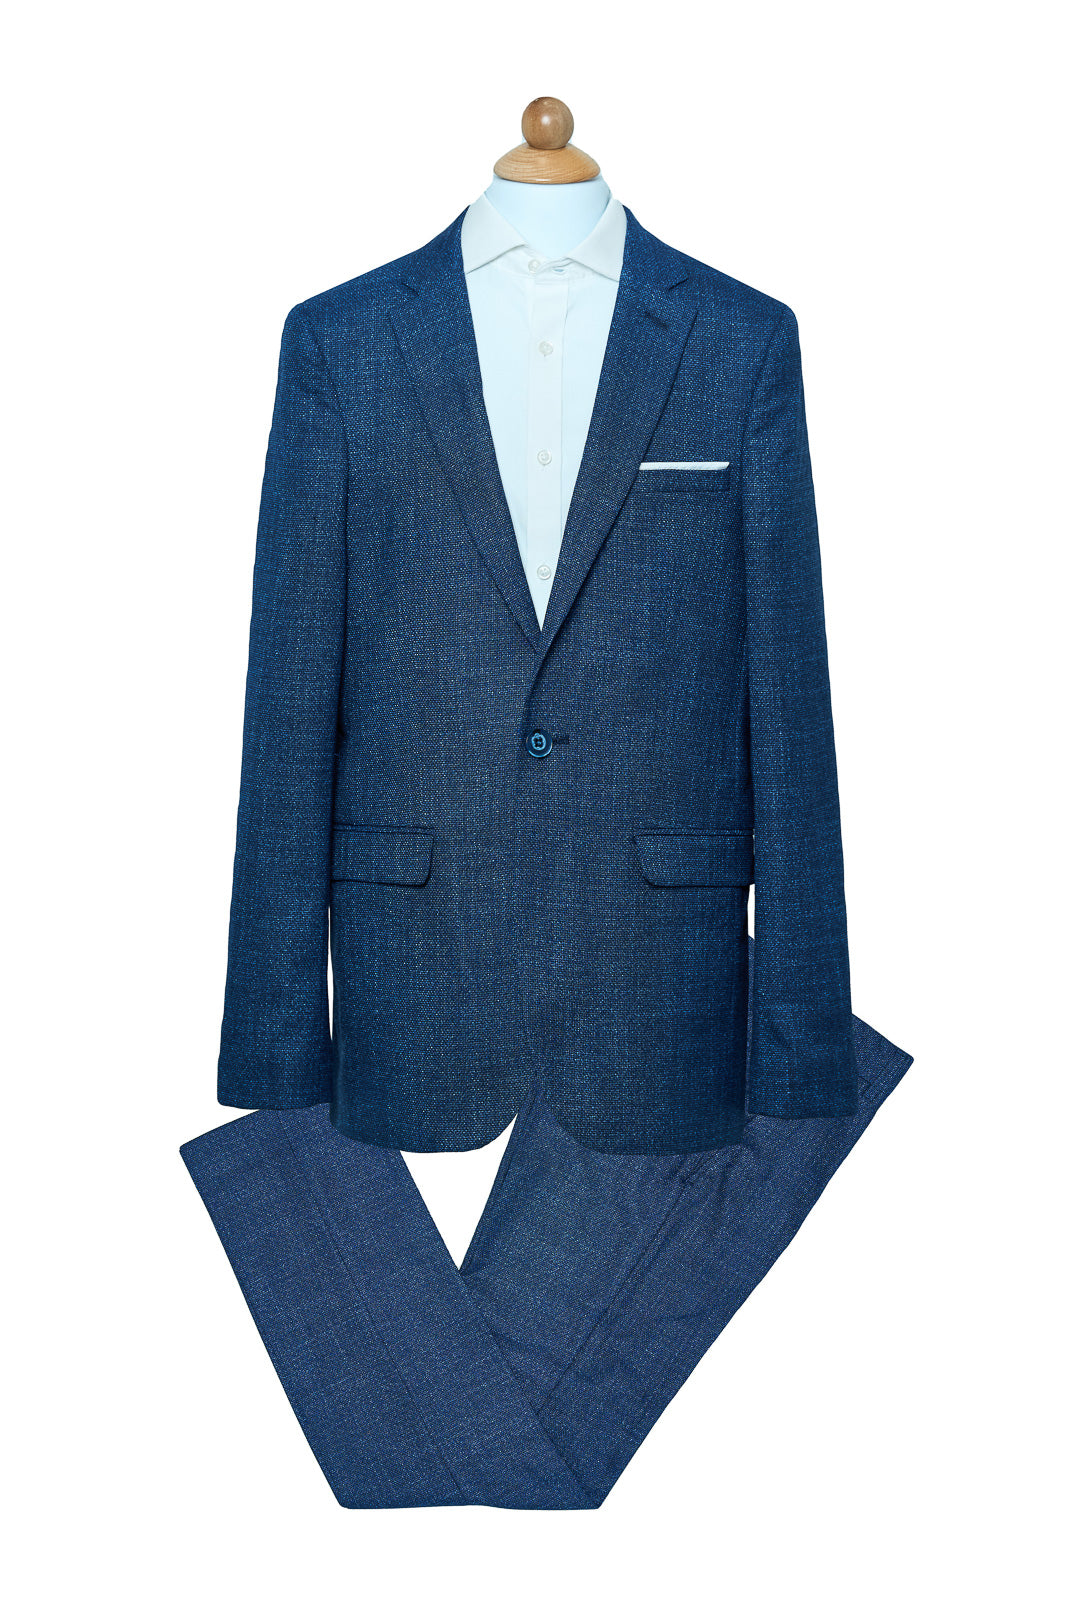 NEW Electric Blue Patterned Suit